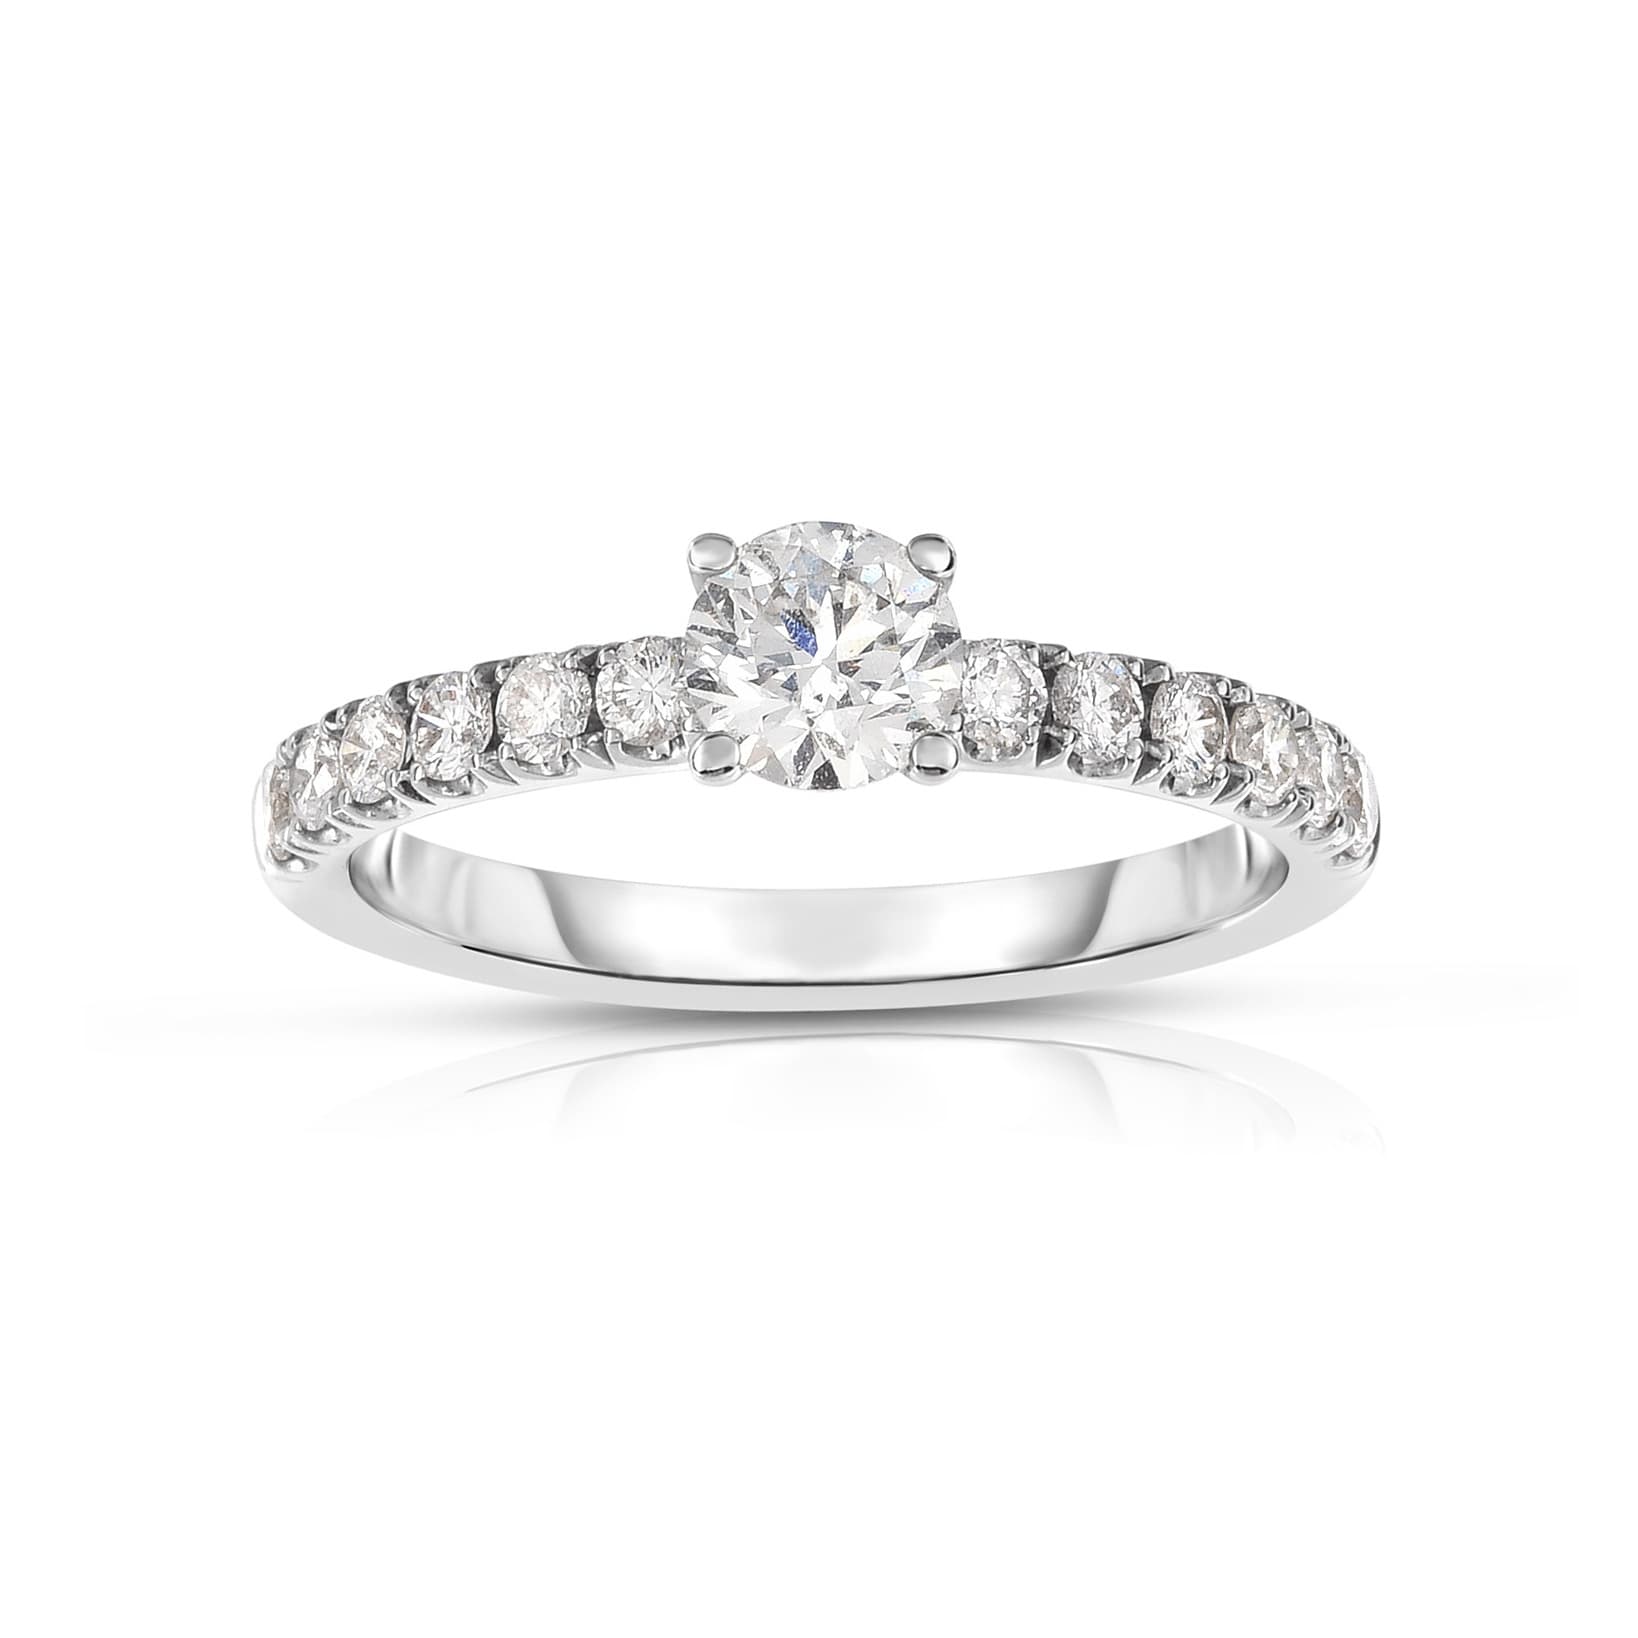 White Gold Pave Diamond Engagement Ring with .50 CT Round Diamond Center 0